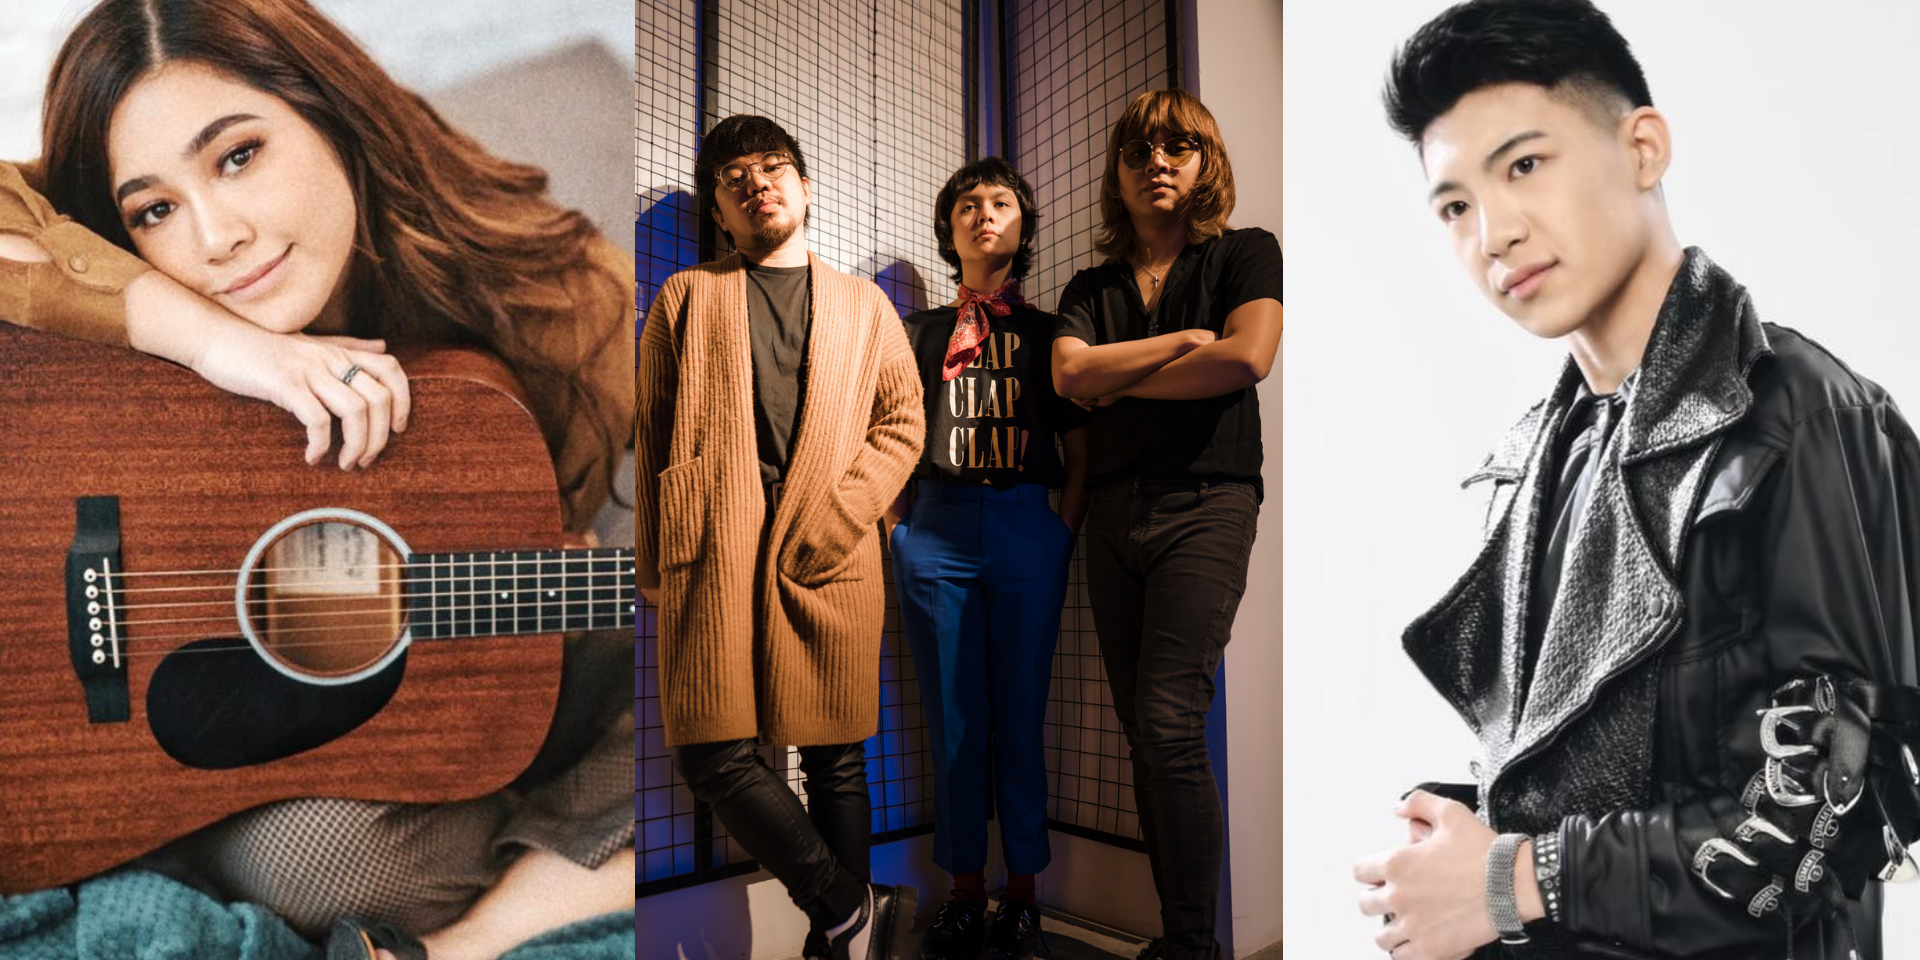 IV of Spades, Moira Dela Torre, and Darren Espanto are the most talked about Filipino musicians on Twitter